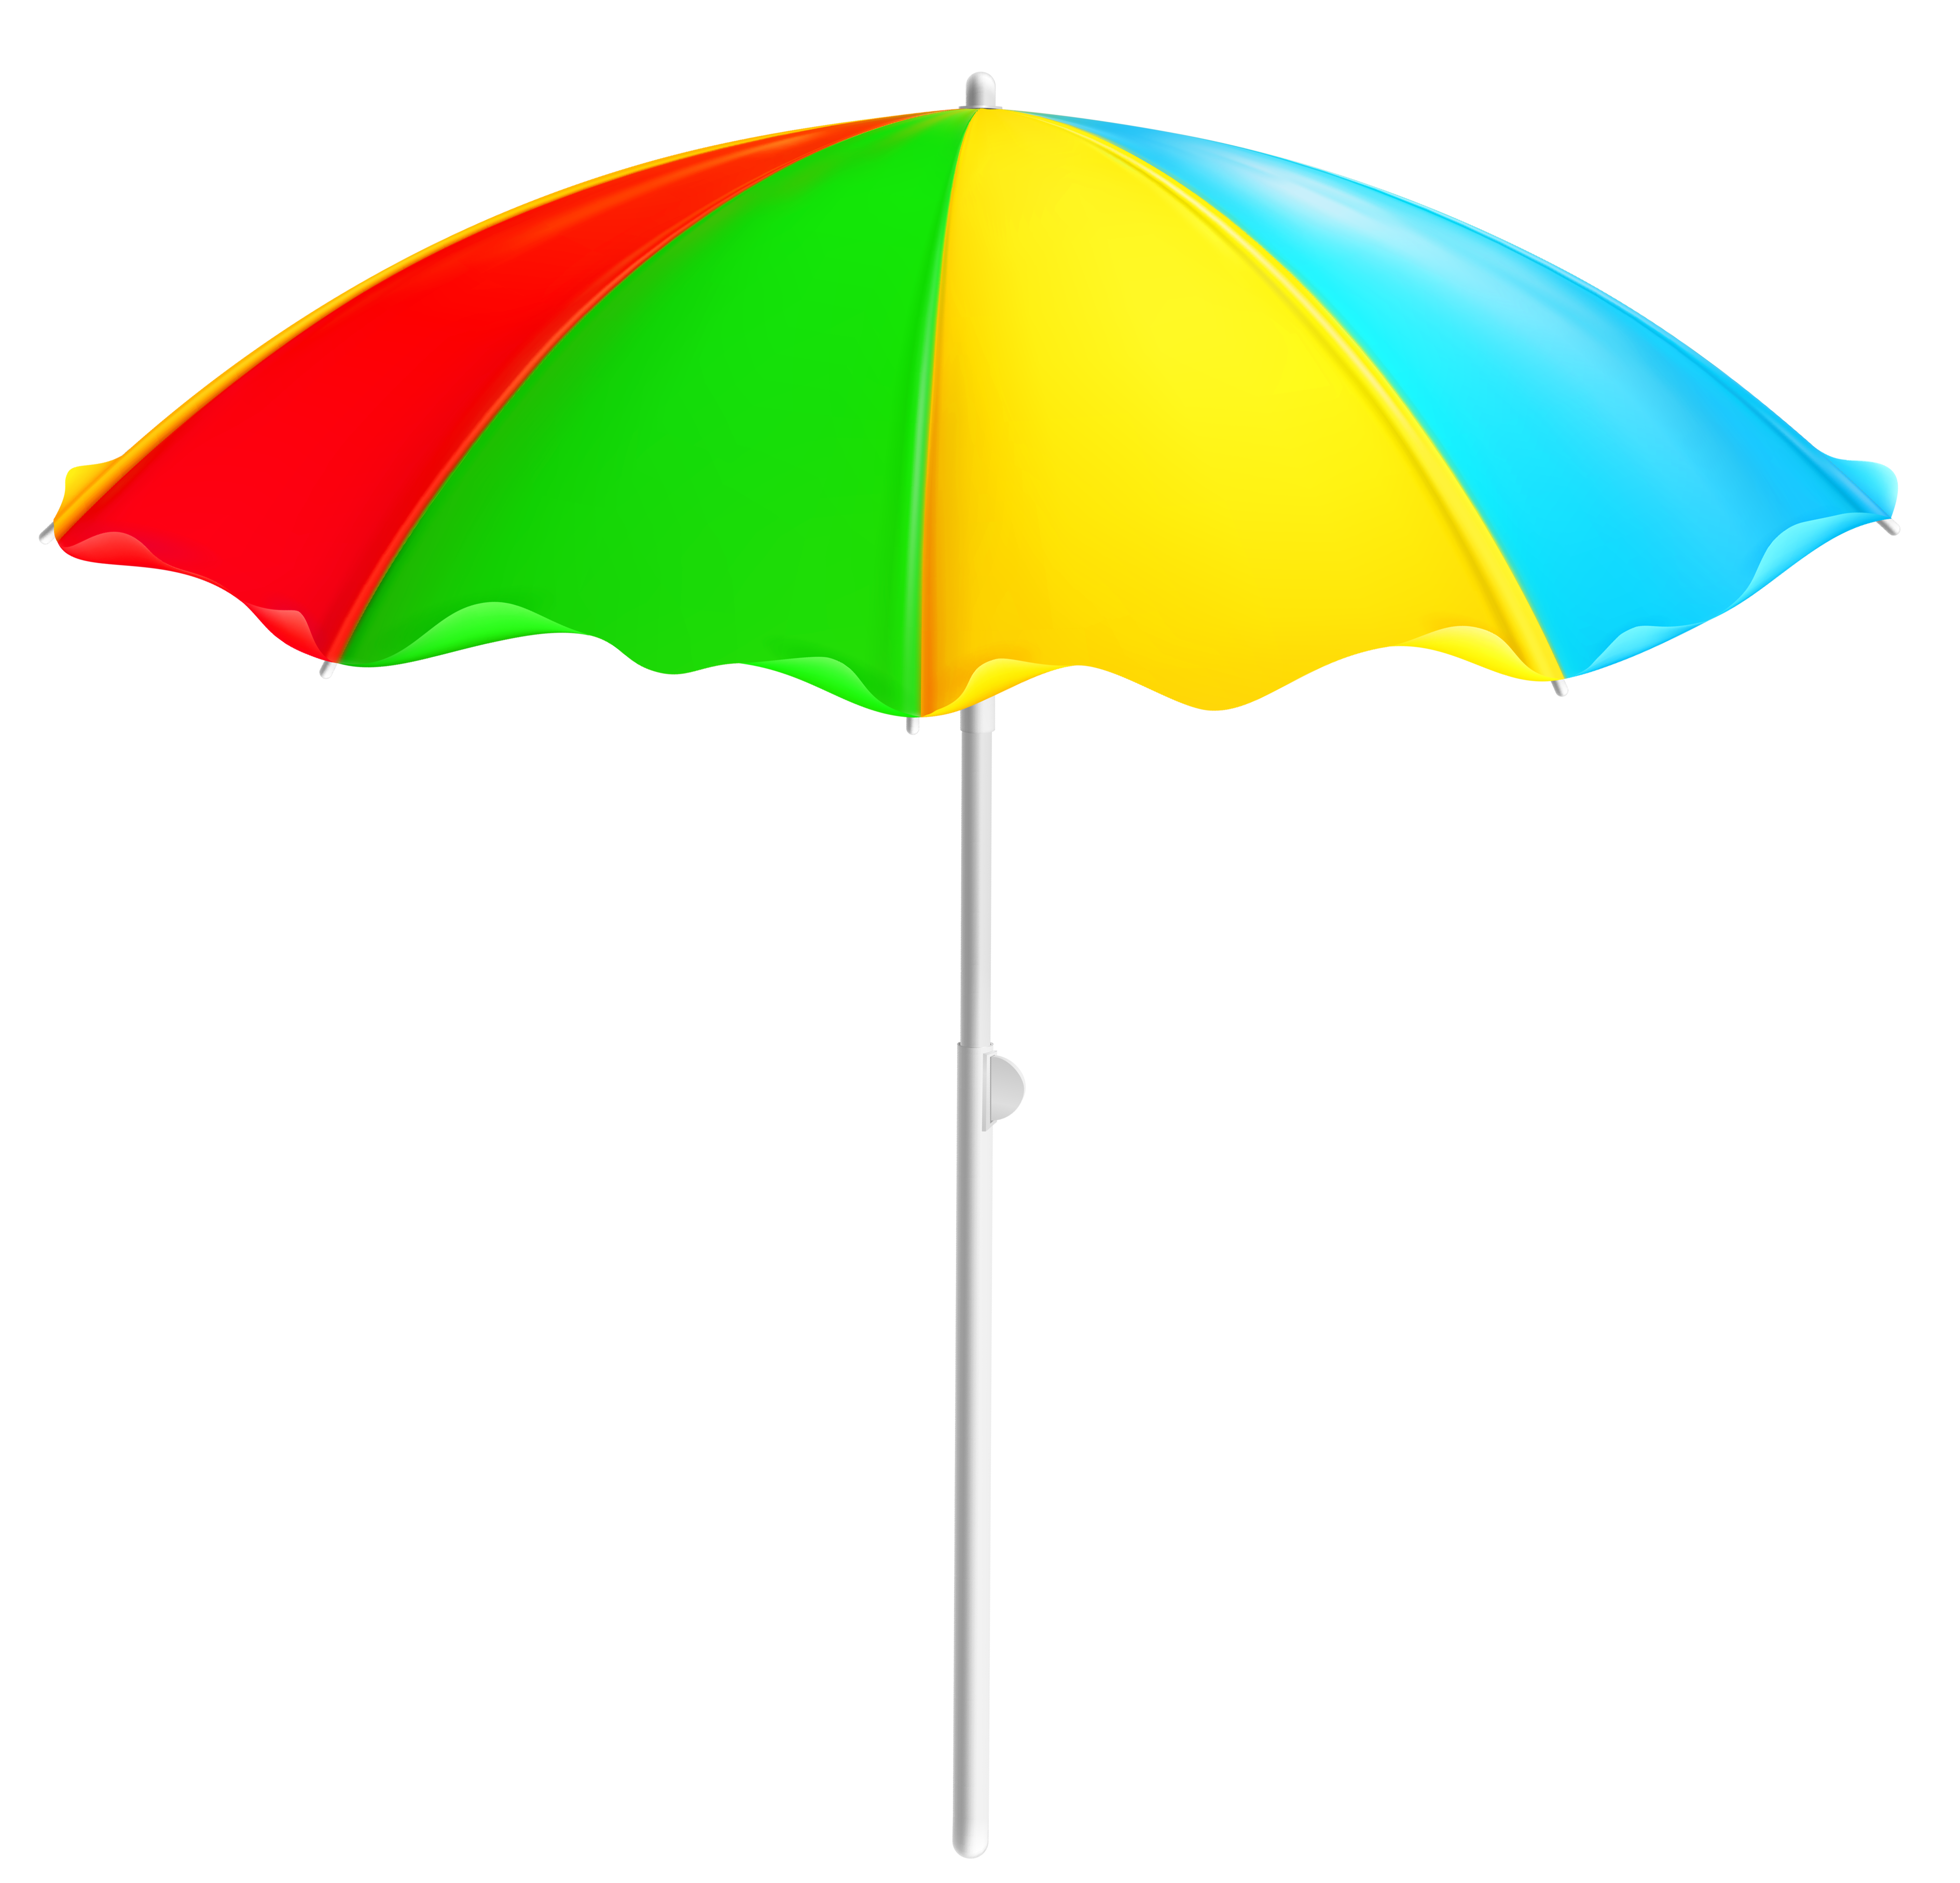 Free Umbrella Transparent Background, Download Free Umbrella Transparent  Background png images, Free ClipArts on Clipart Library